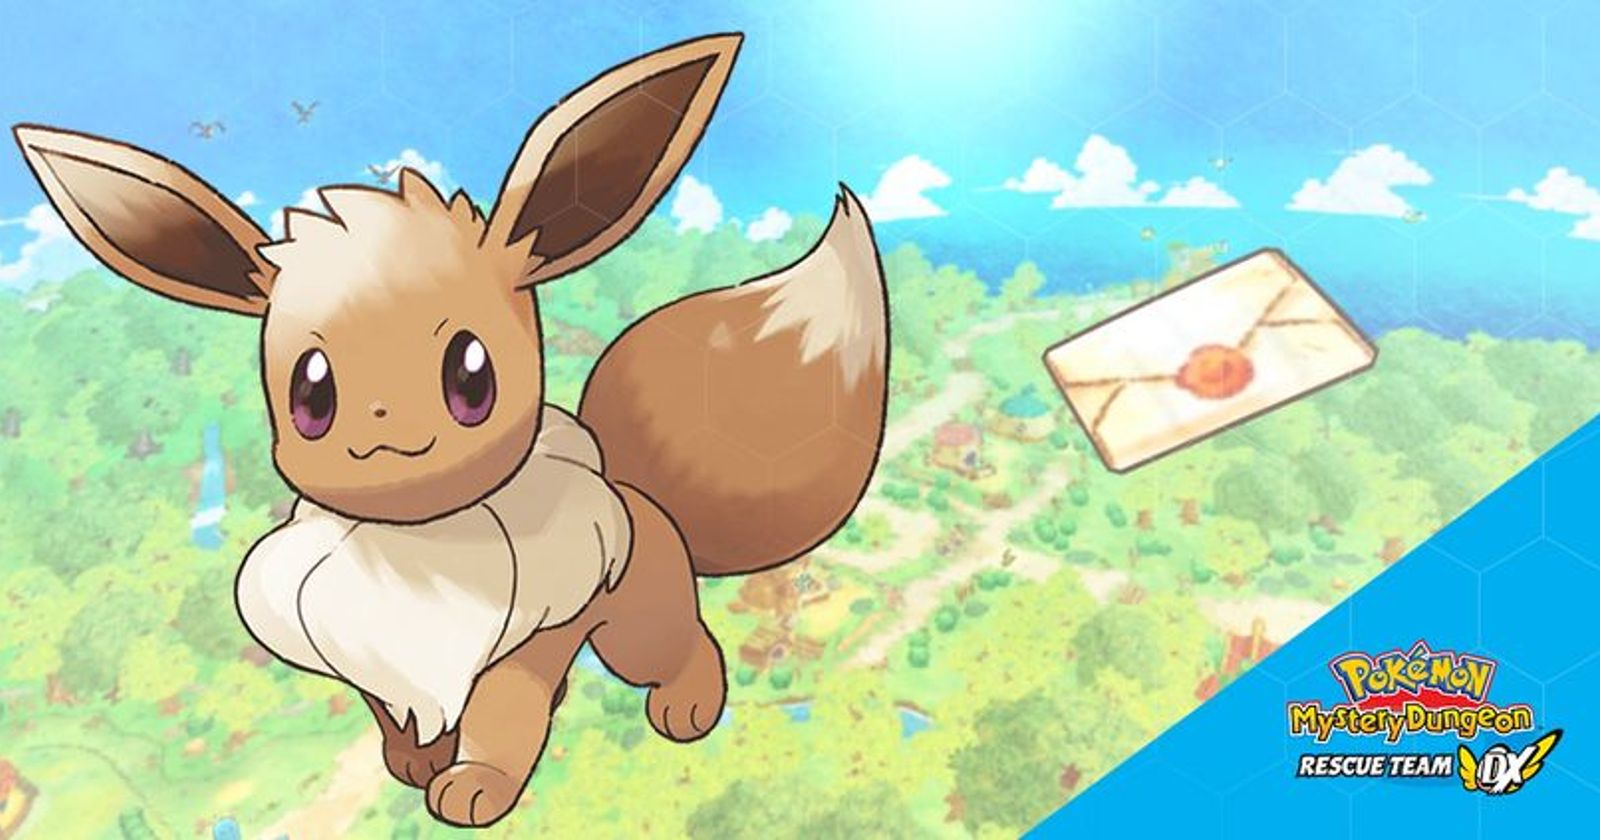 Which Eevee Evolution Is Best? Here Are The Stats You Need To Know